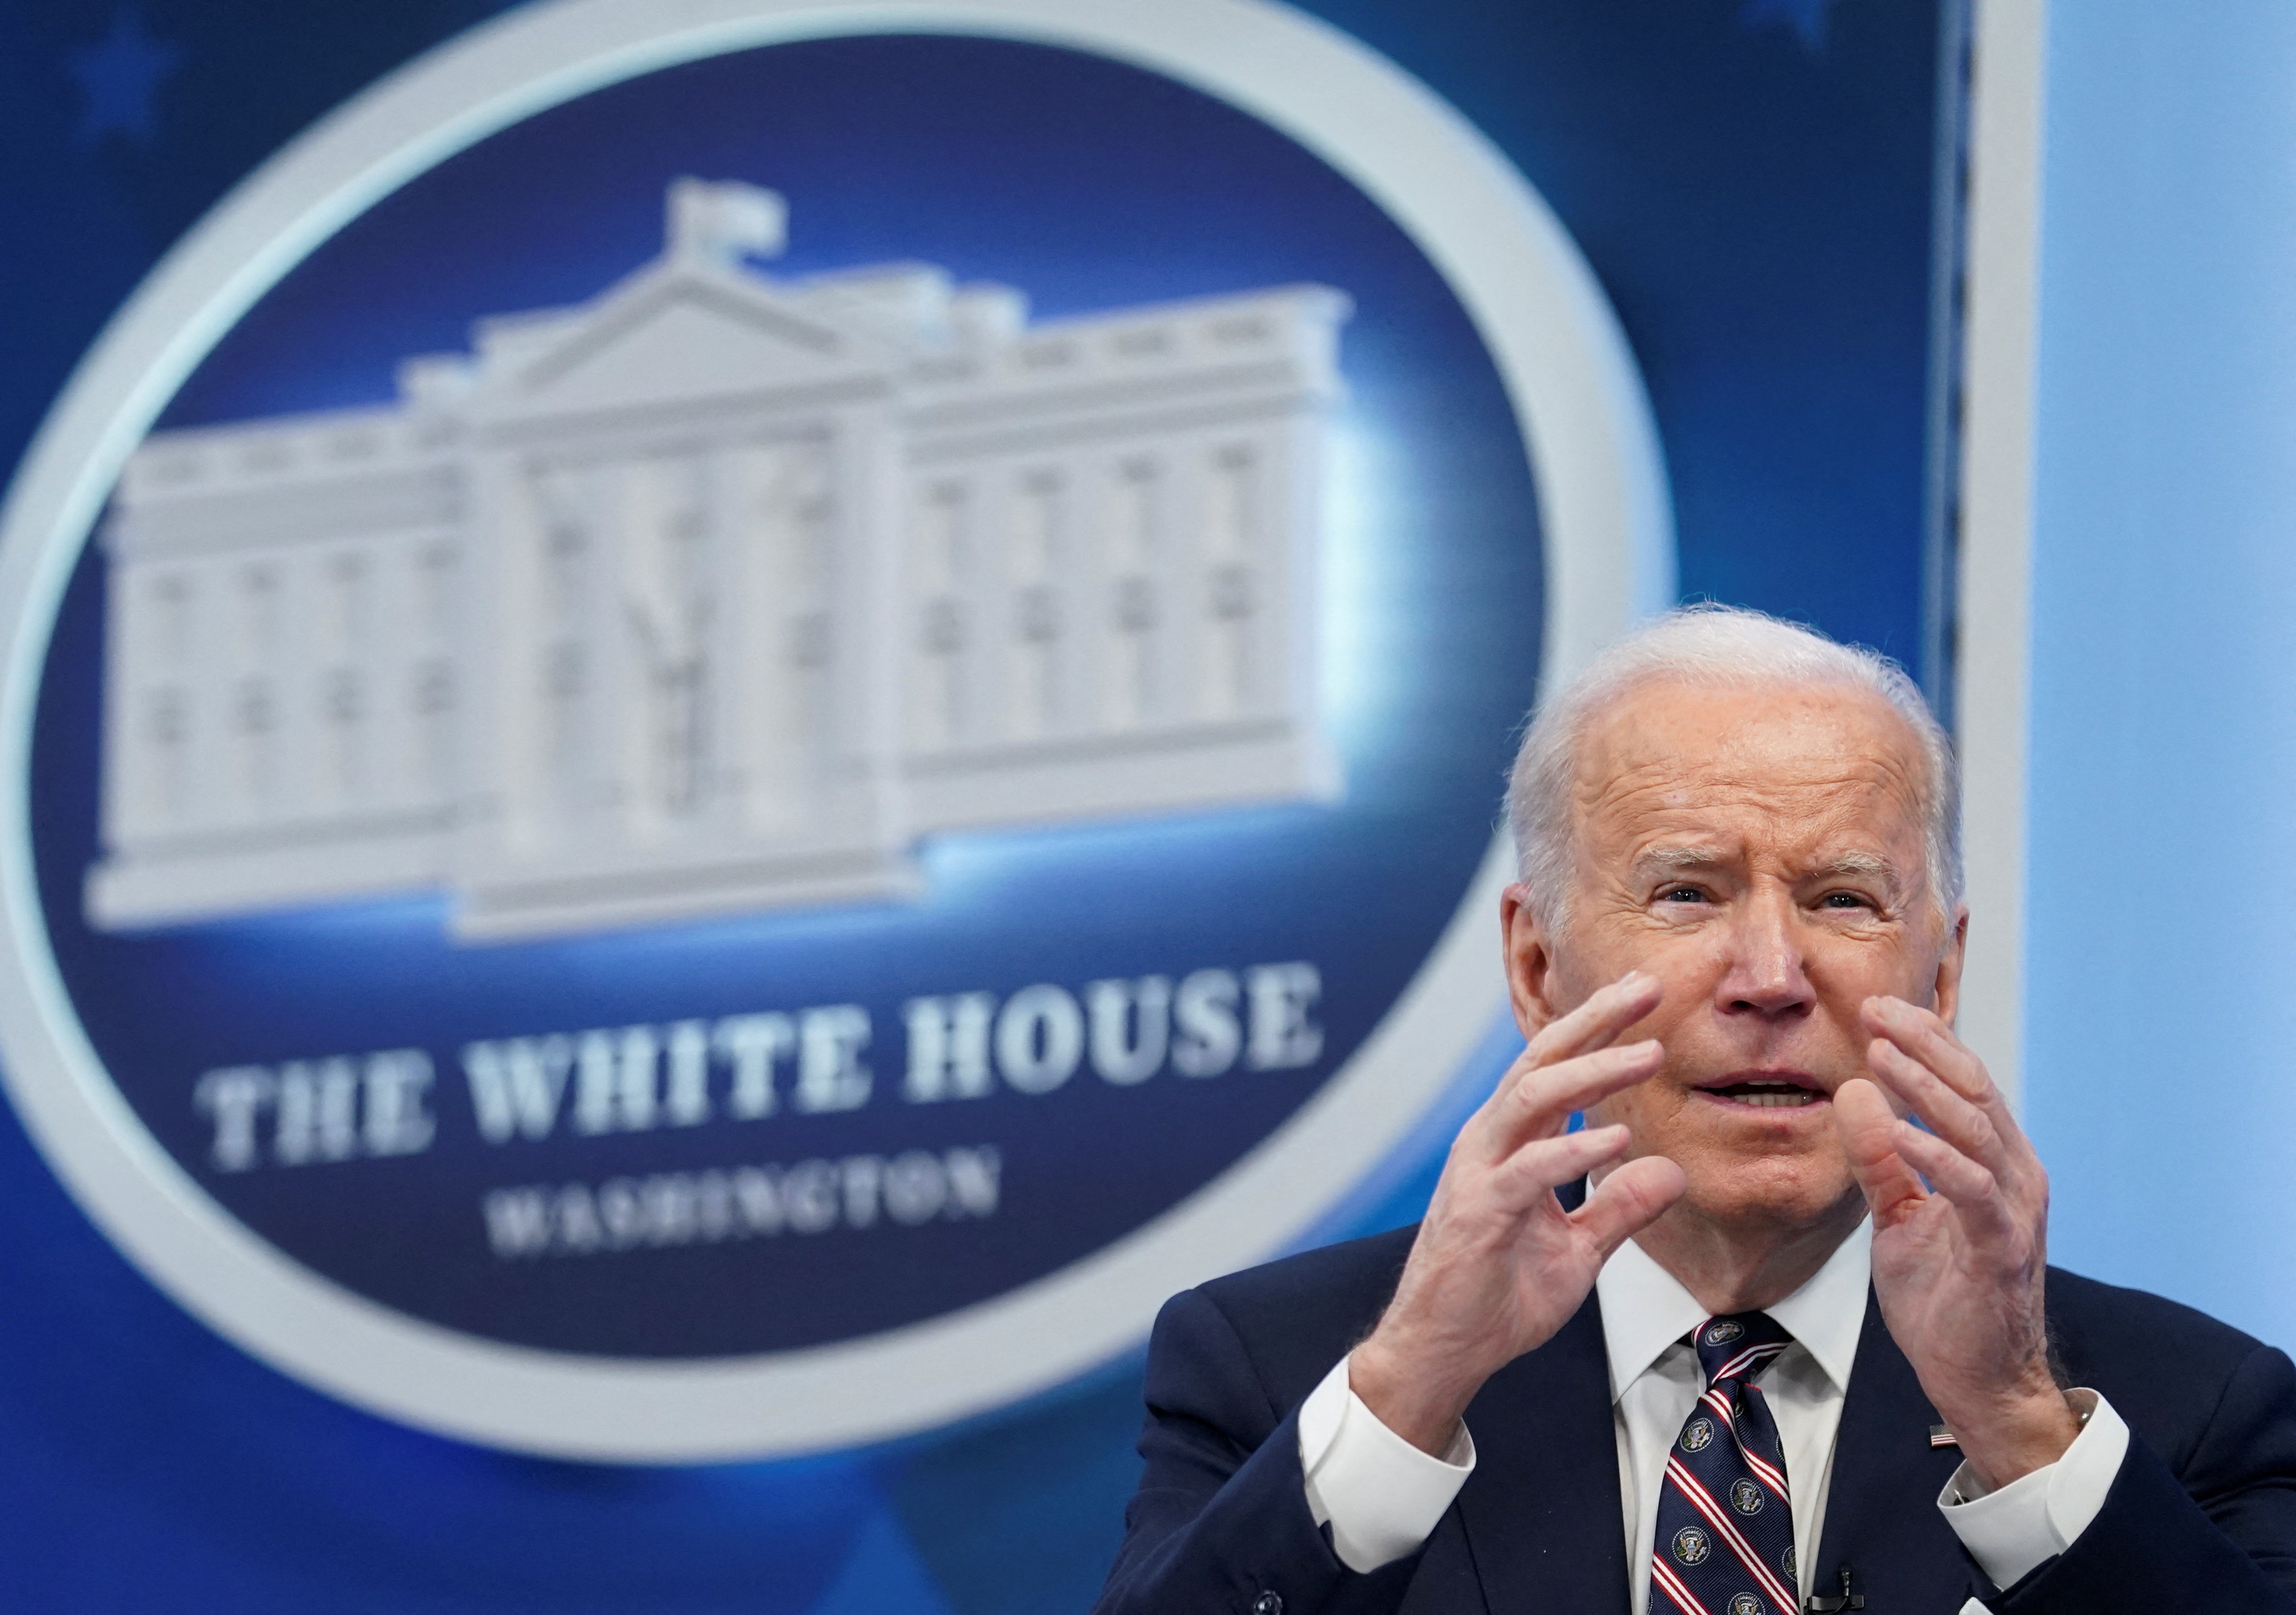 Biden’s White House is battling over the border – here’s what history tells us could happen next